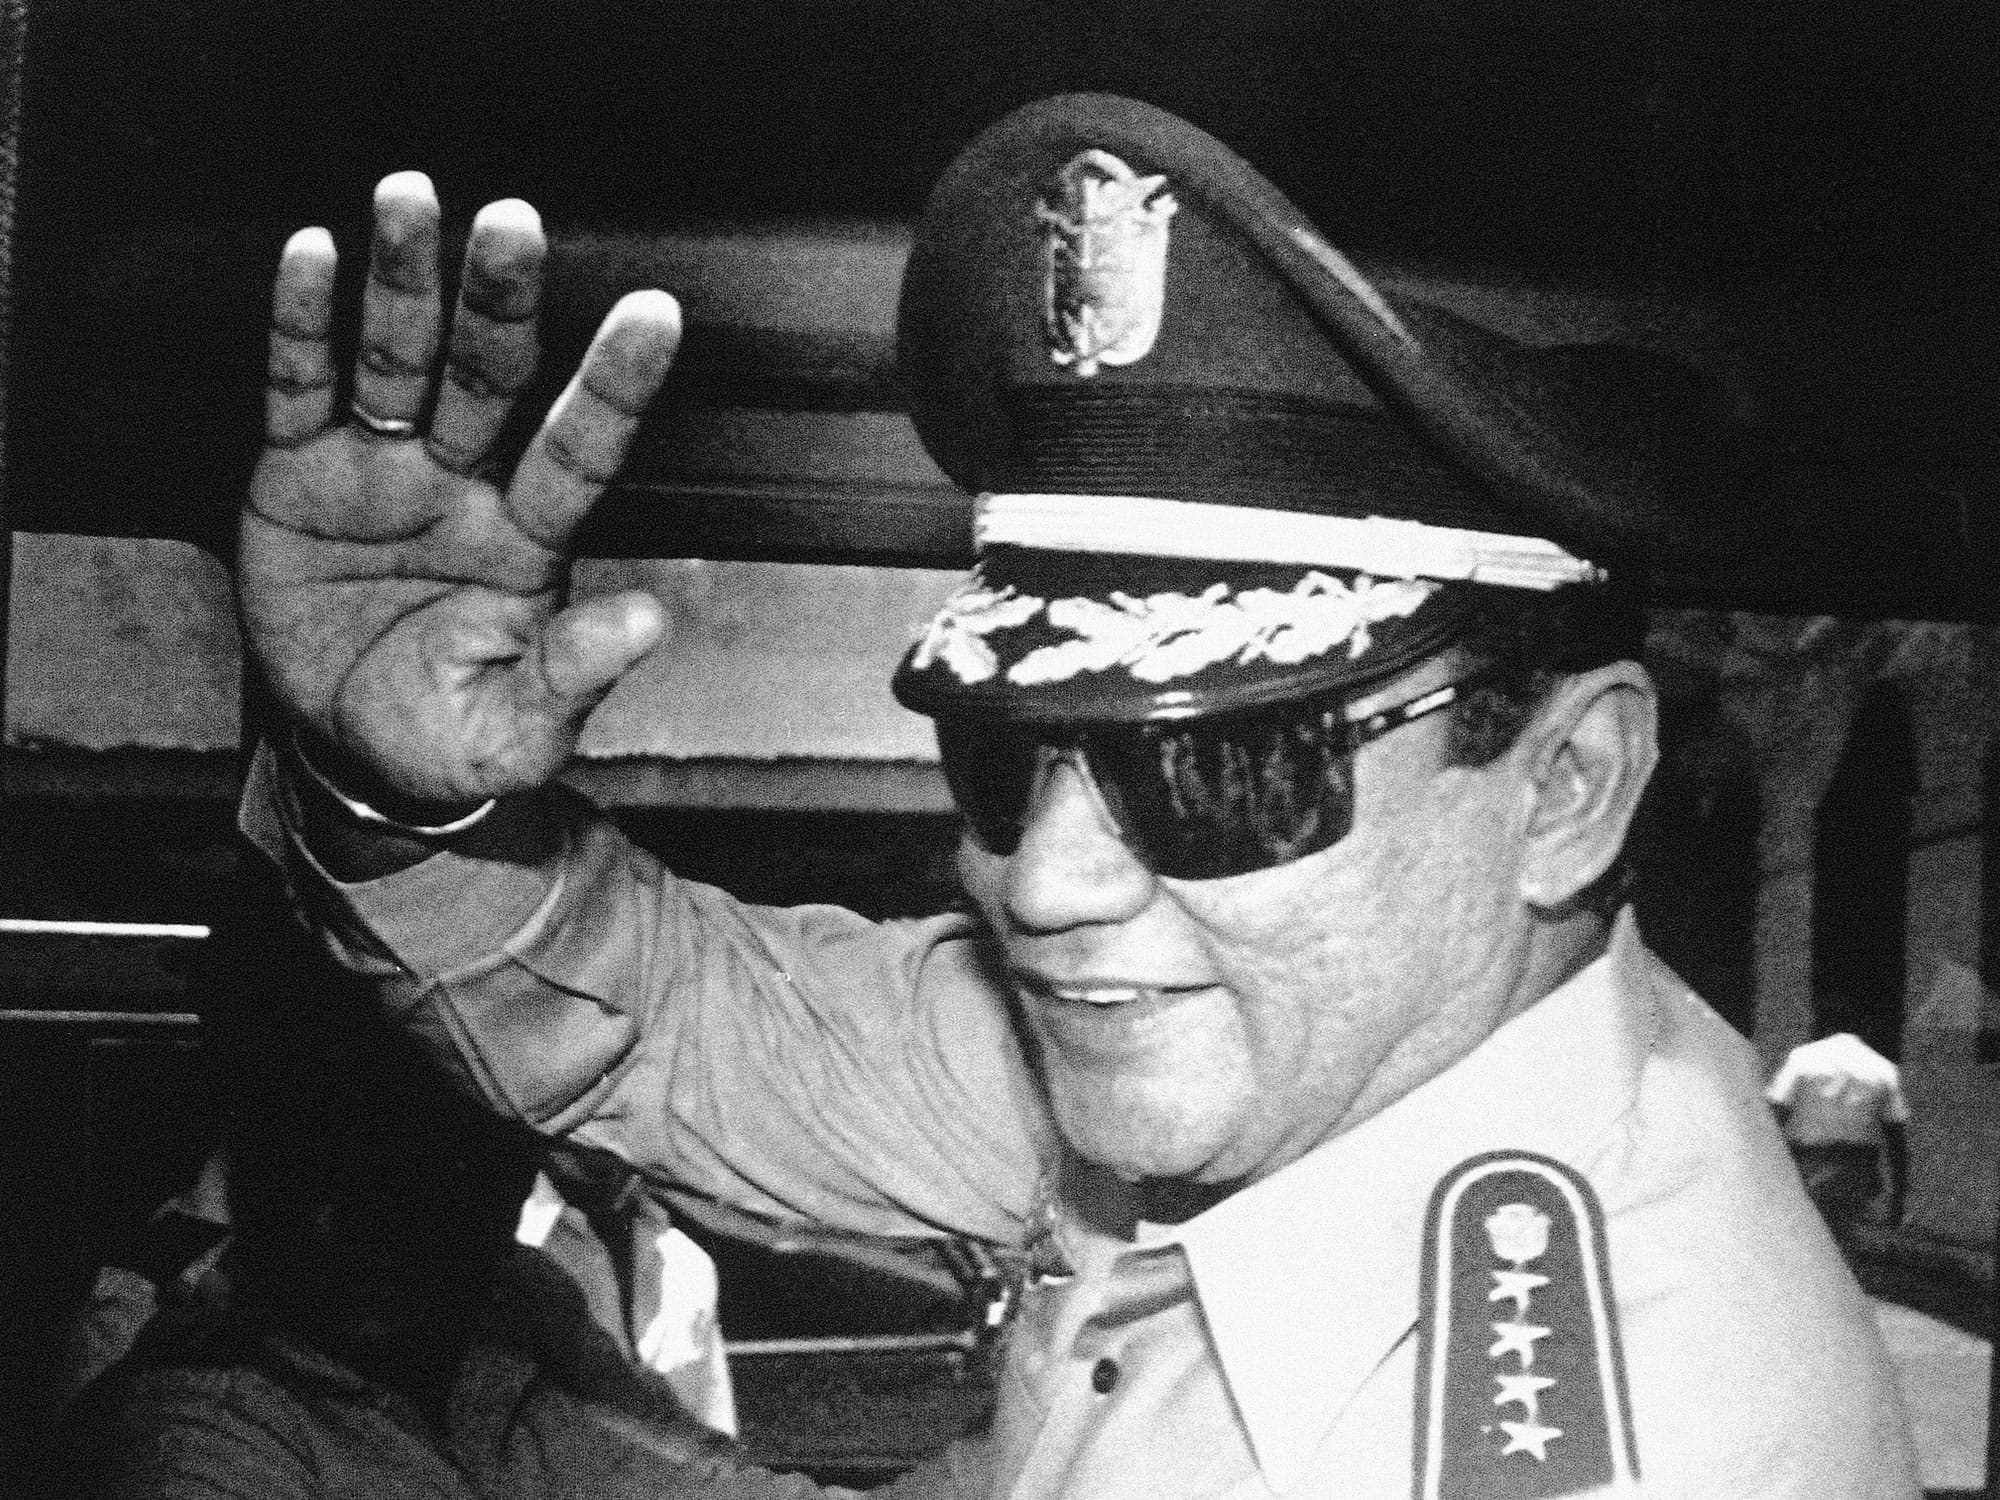 In this Aug. 31, 1989 file photo, Gen. Manuel Antonio Noriega waves to newsmen after a state council meeting, at the presidential palace in Panama City, where they announced the new president of the republic. Panama's ex-dictator Noriega died Monday, May 29, 2017, in a hospital in Panama City. He was 83.